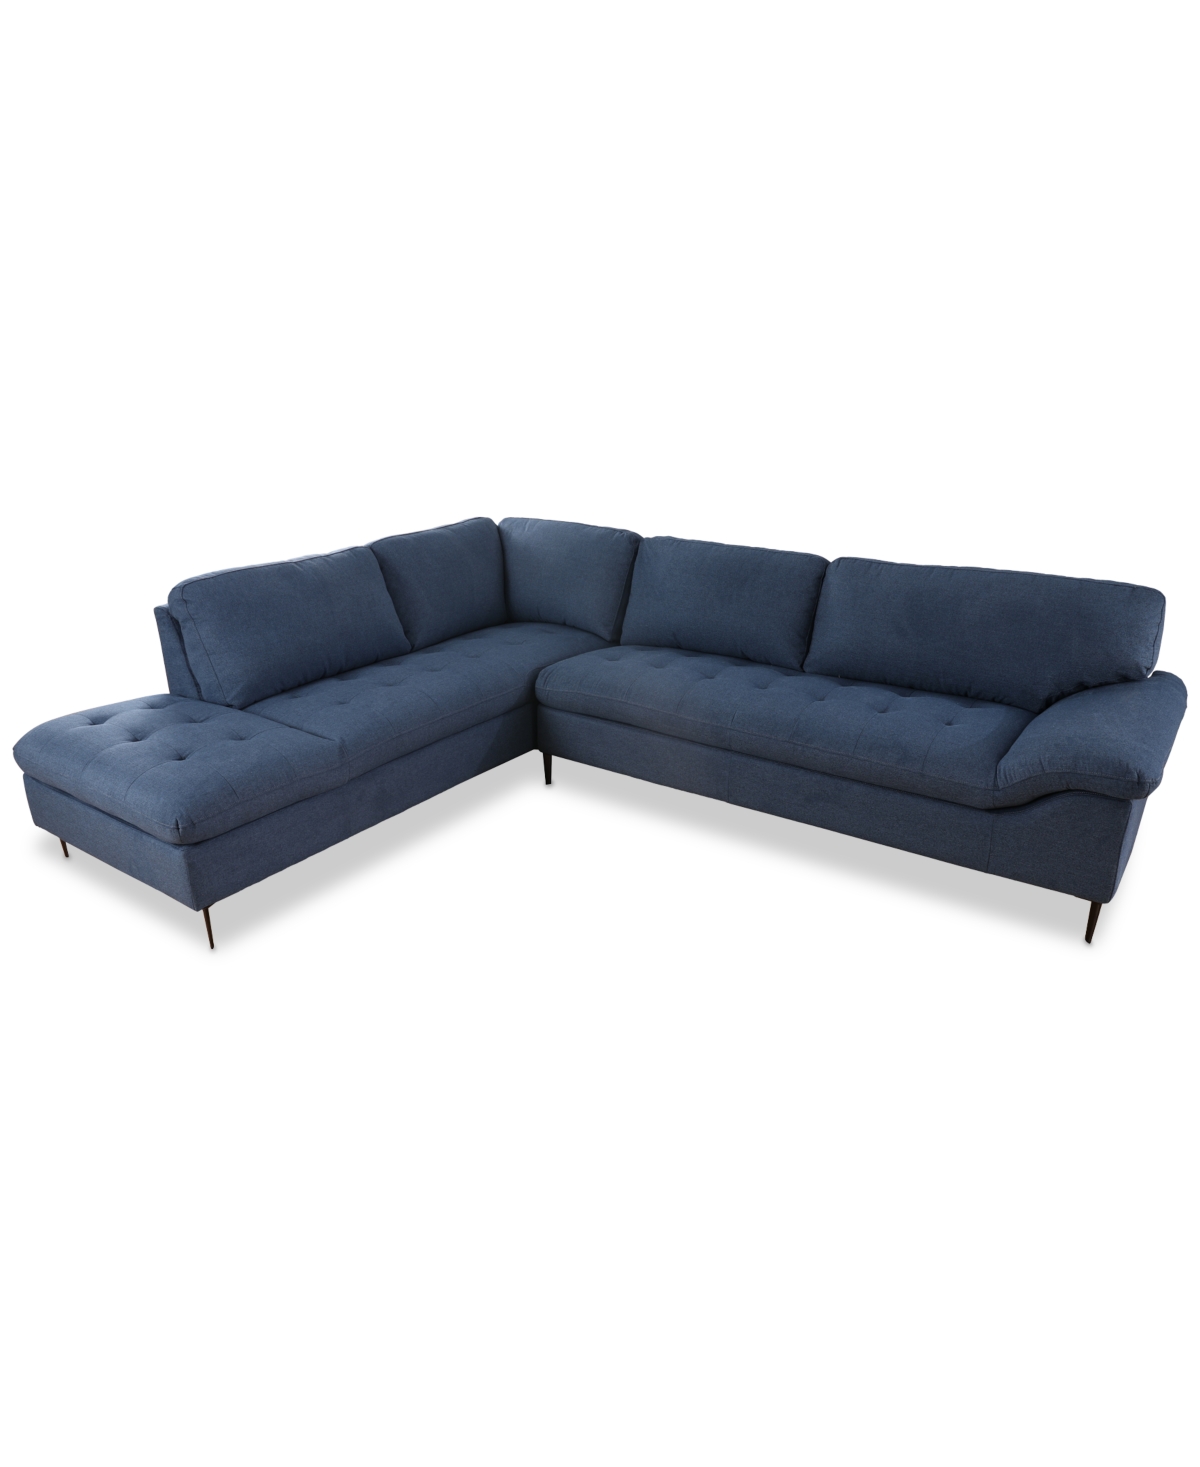 Furniture Closeout! Torbin 90" 2-pc. Fabric Sectional Sofa, Created For Macy's In Blue